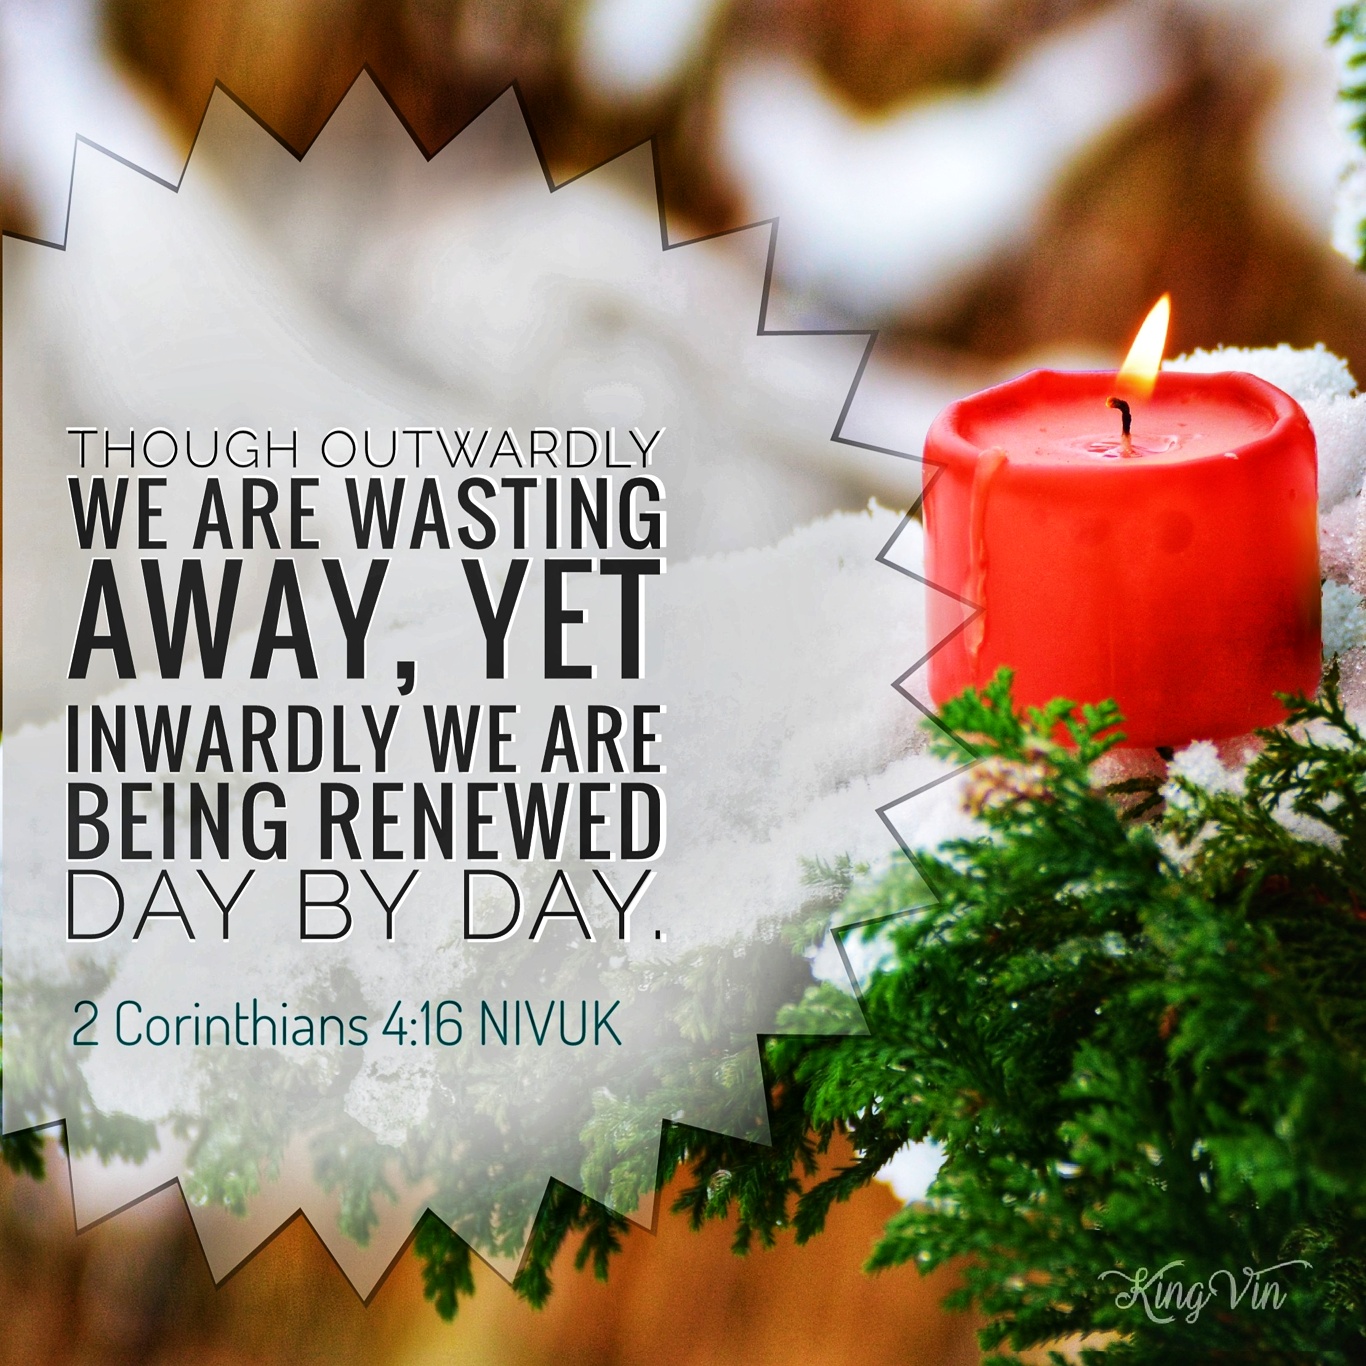 Though outwardly we are wasting away, yet inwardly we are being renewed day by day. 2 Corinthians 4:16